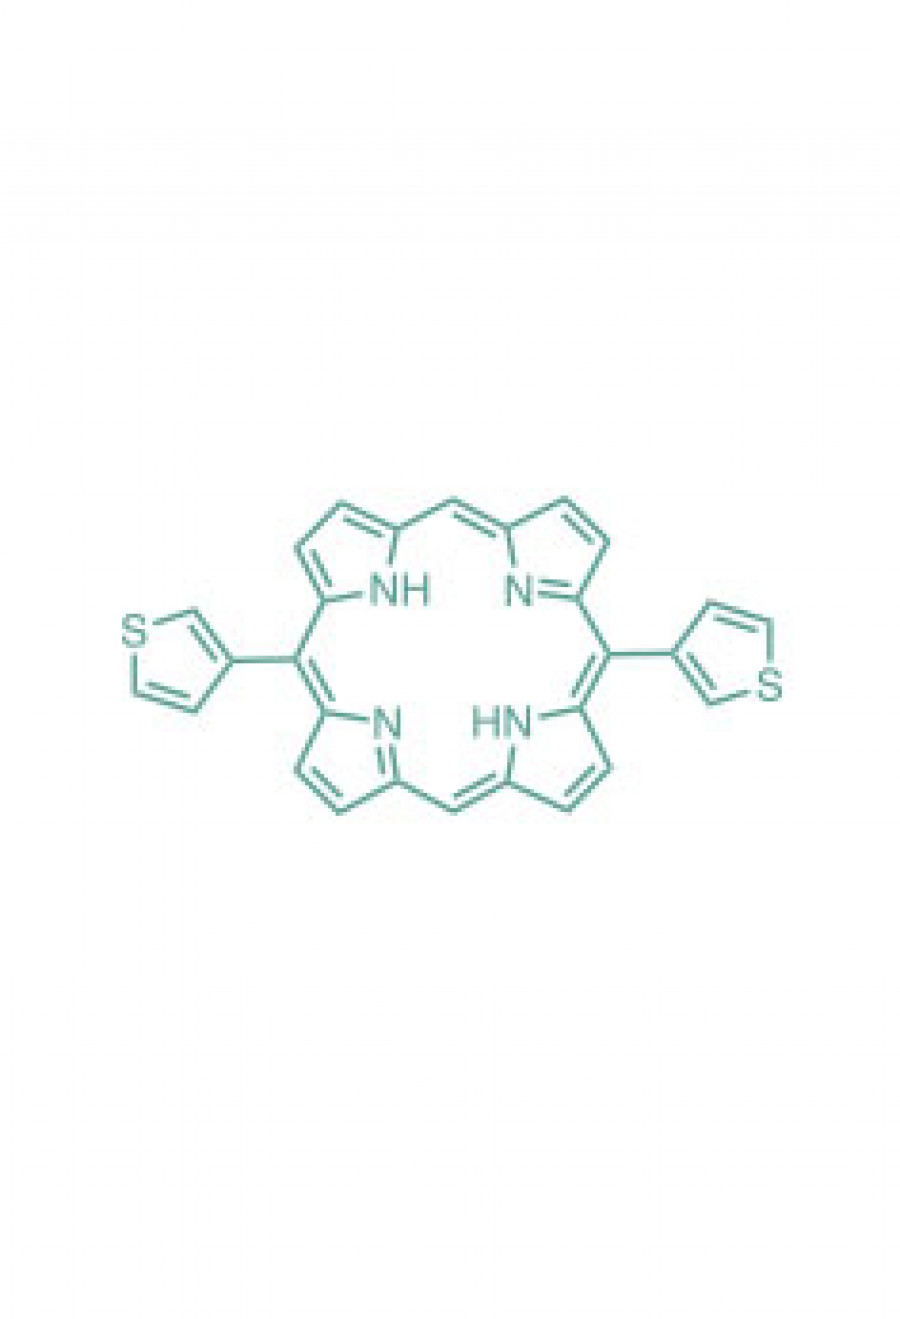 5,15-(di-3-thienyl)porphyrin  | Porphychem Expert porphyrin synthesis for research & industry